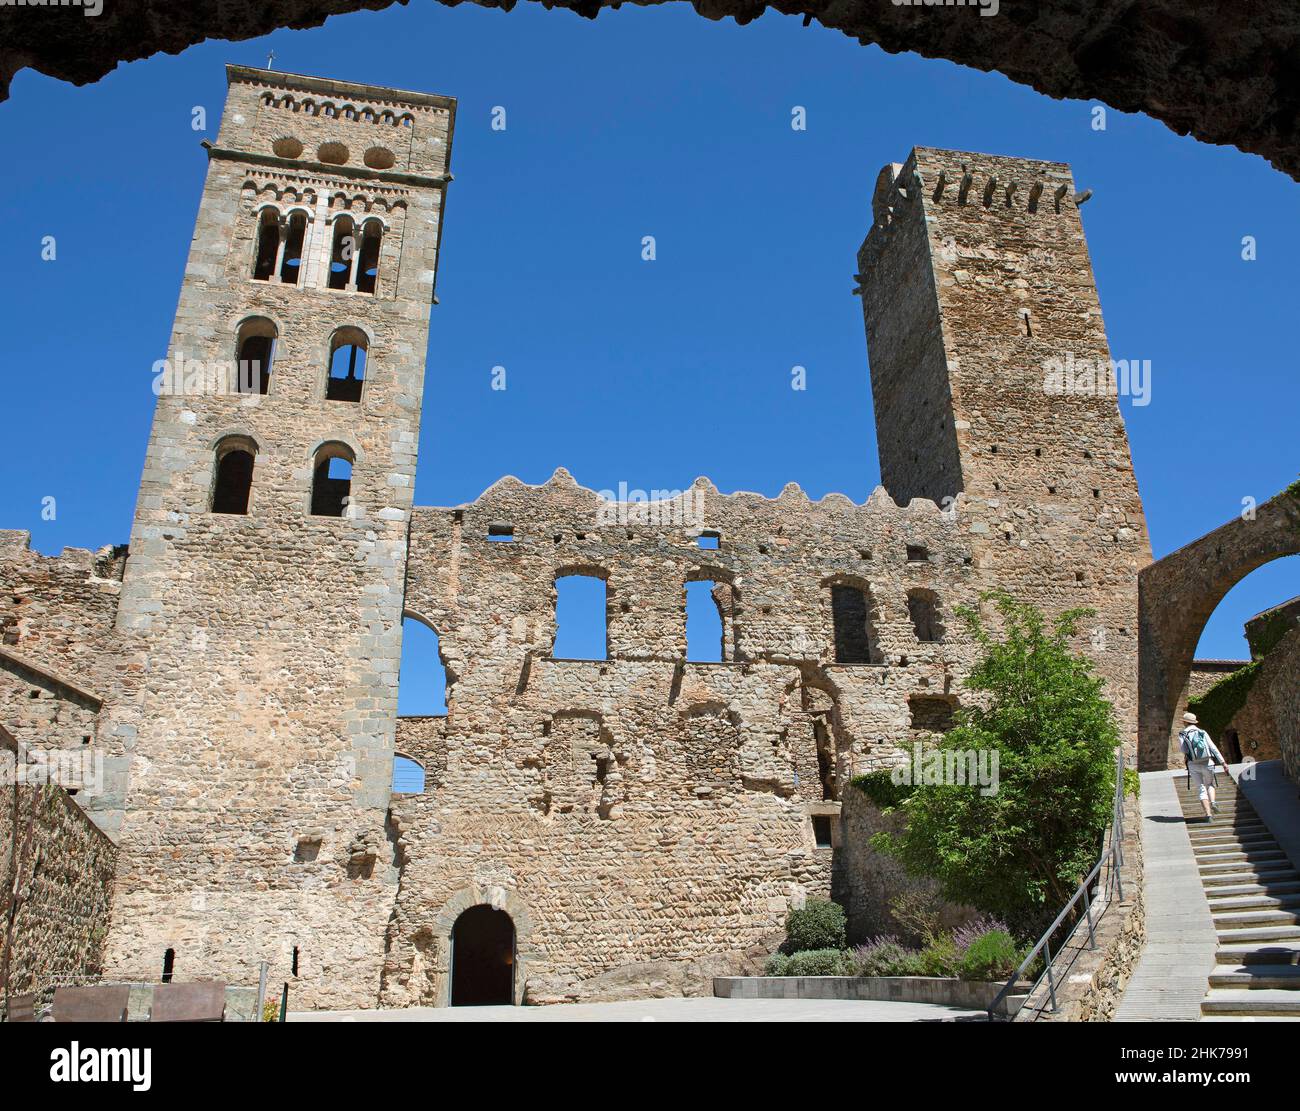 Bell defence tower and defence tower in the monastery of Sant Pere de Rodes, Costa Brava, Catalonia, Spain Stock Photo